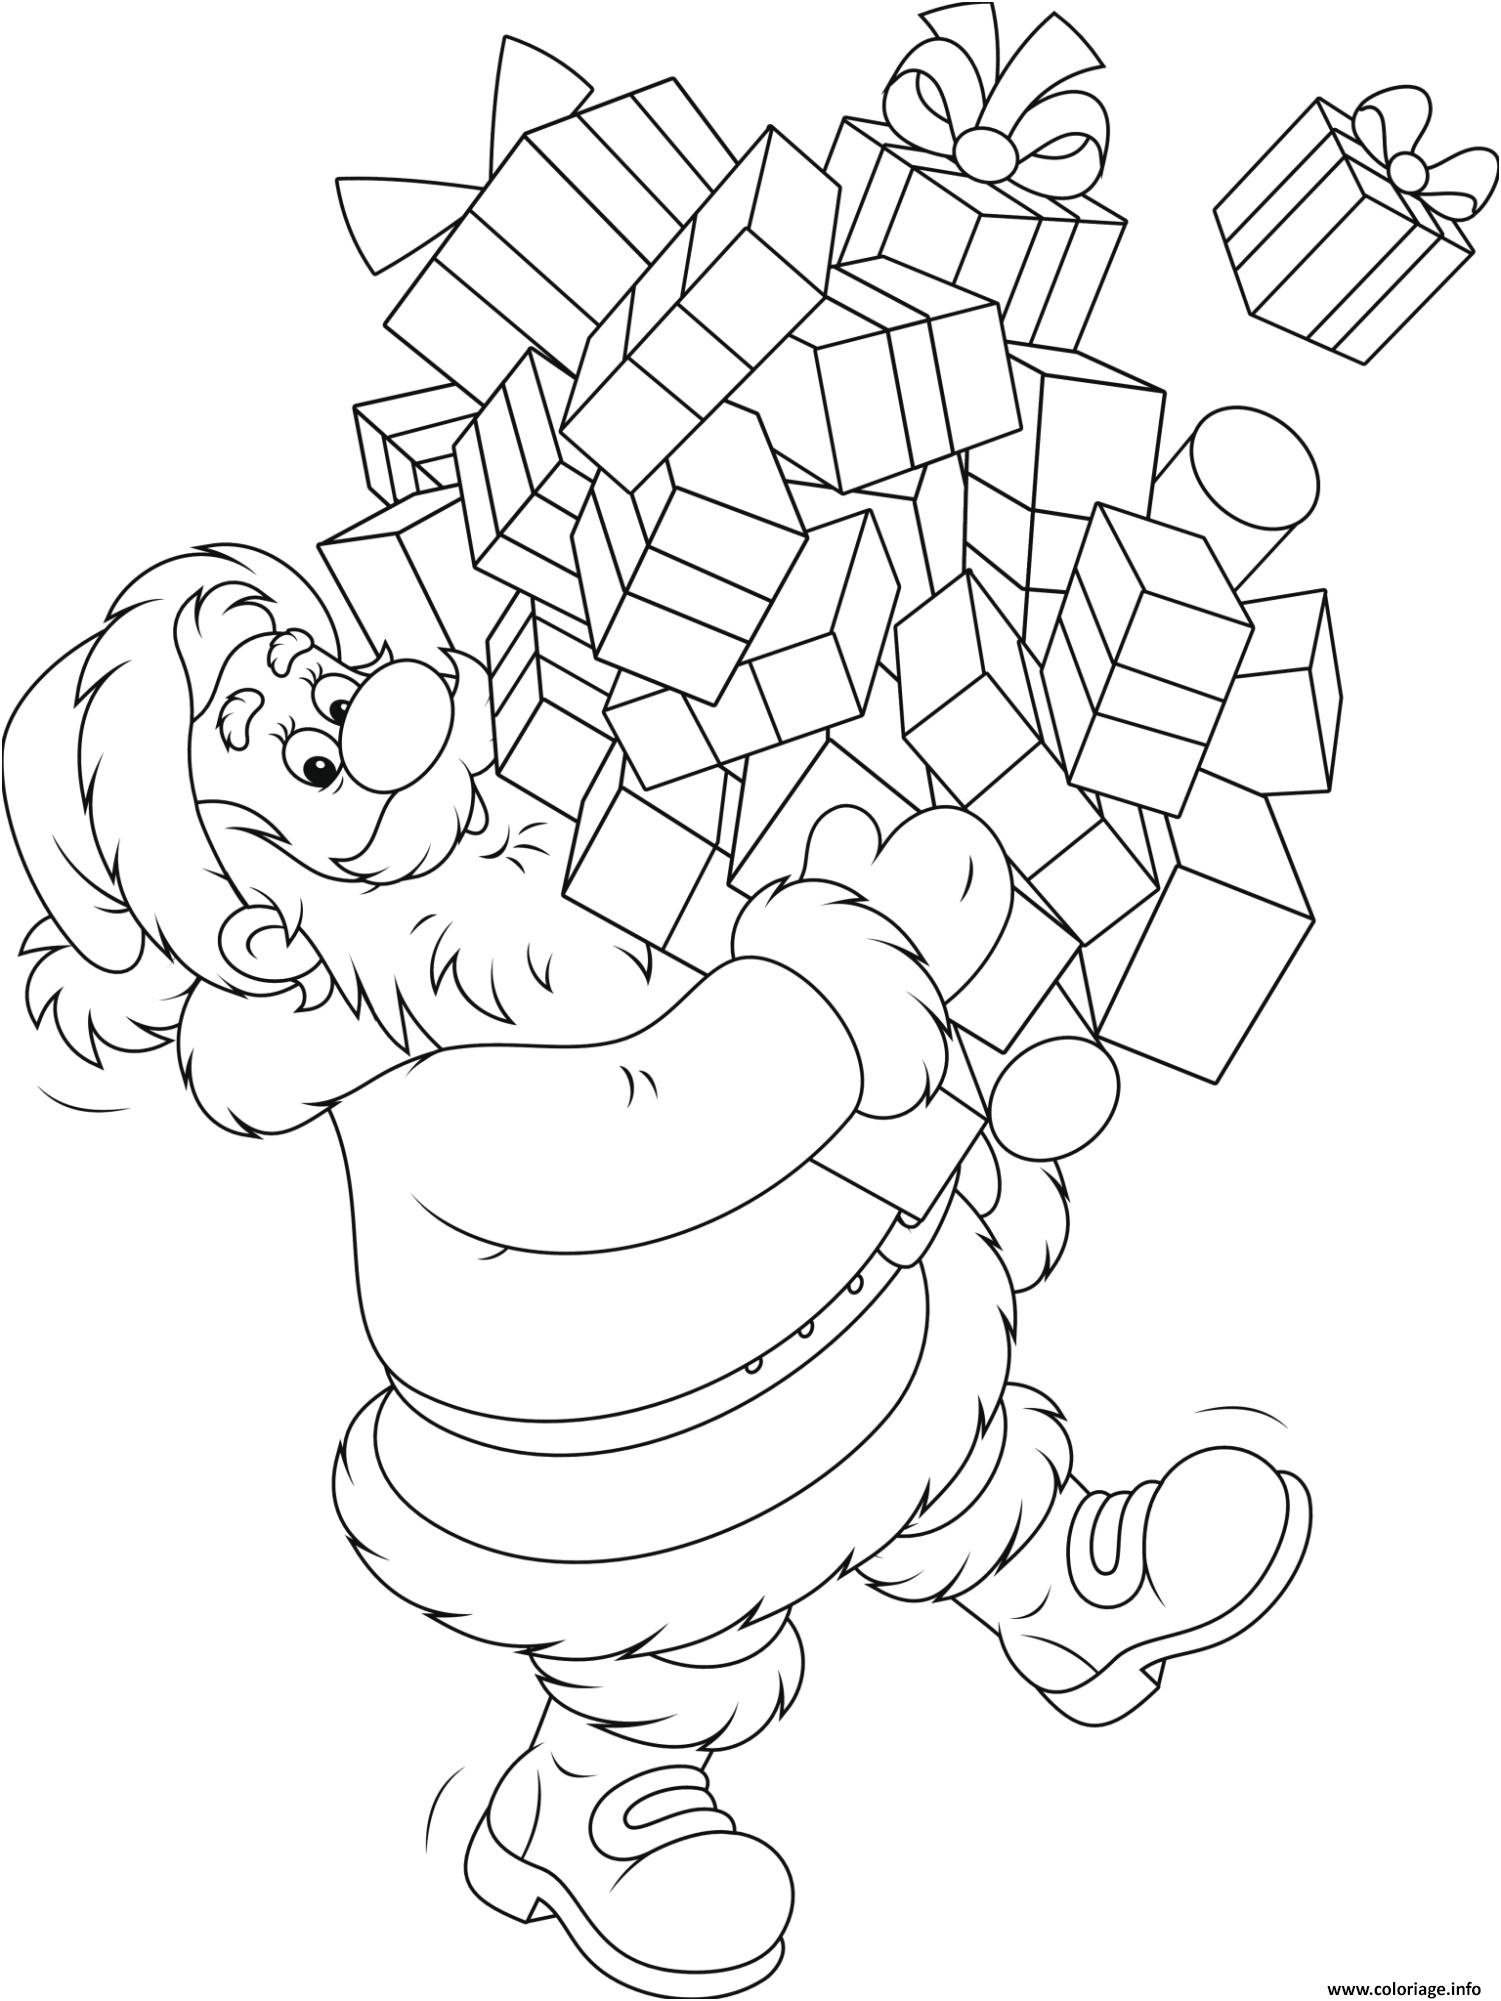 9 Aimable Coloriage Papa Noel Photograph | COLORIAGE